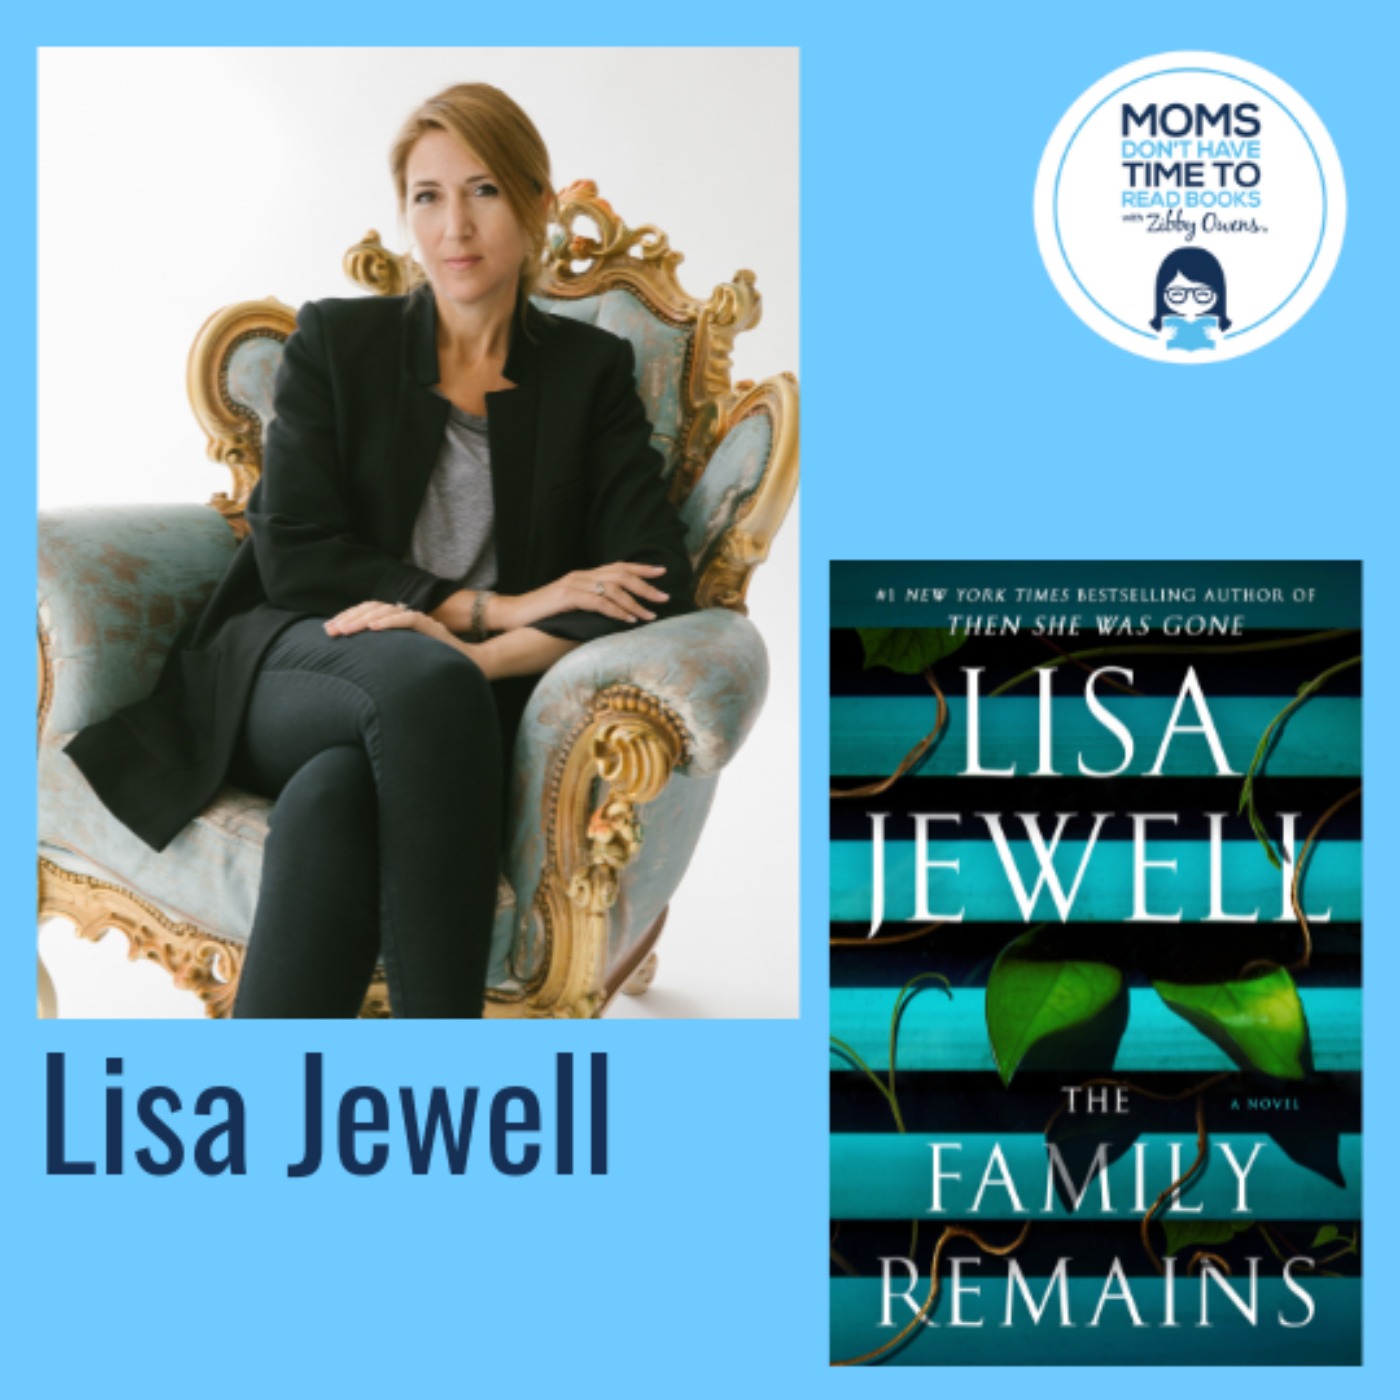 Lisa Jewell, THE FAMILY REMAINS: A Novel